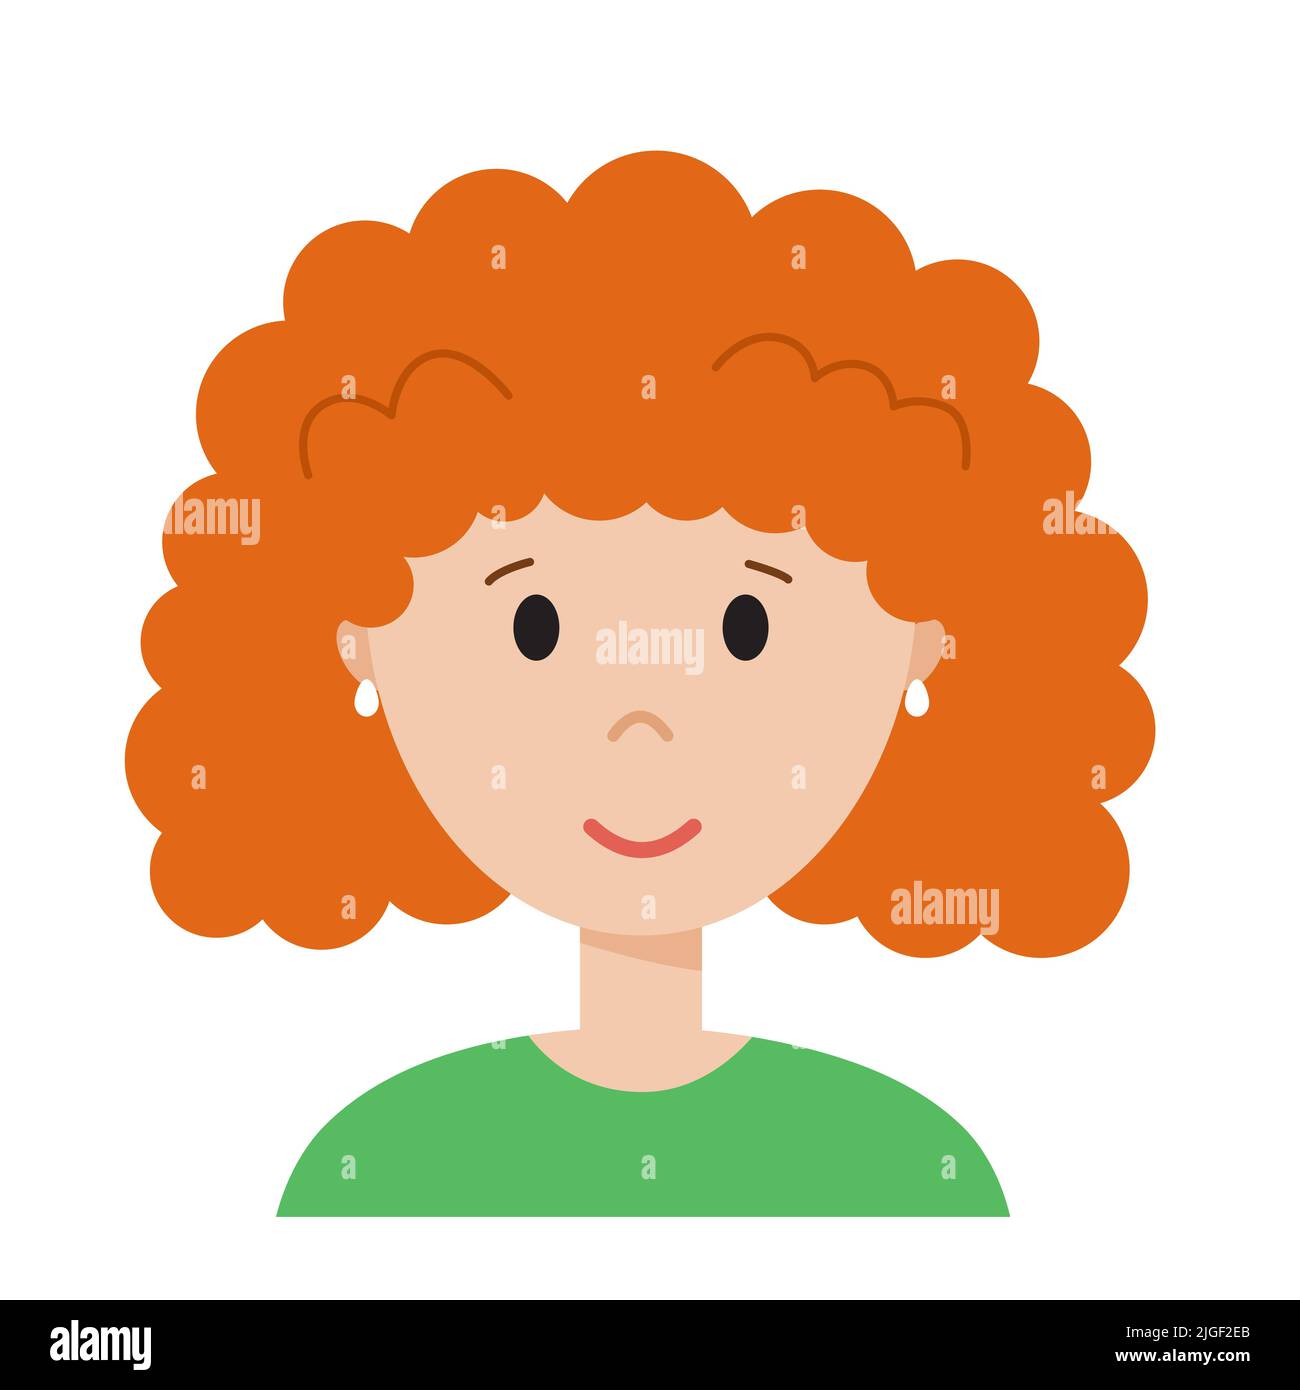 Funny cartoon woman face, cute avatar or portrait. Girl with orange curly hair. Young character for web in flat style. Print for sticker, emoji, icon Stock Vector